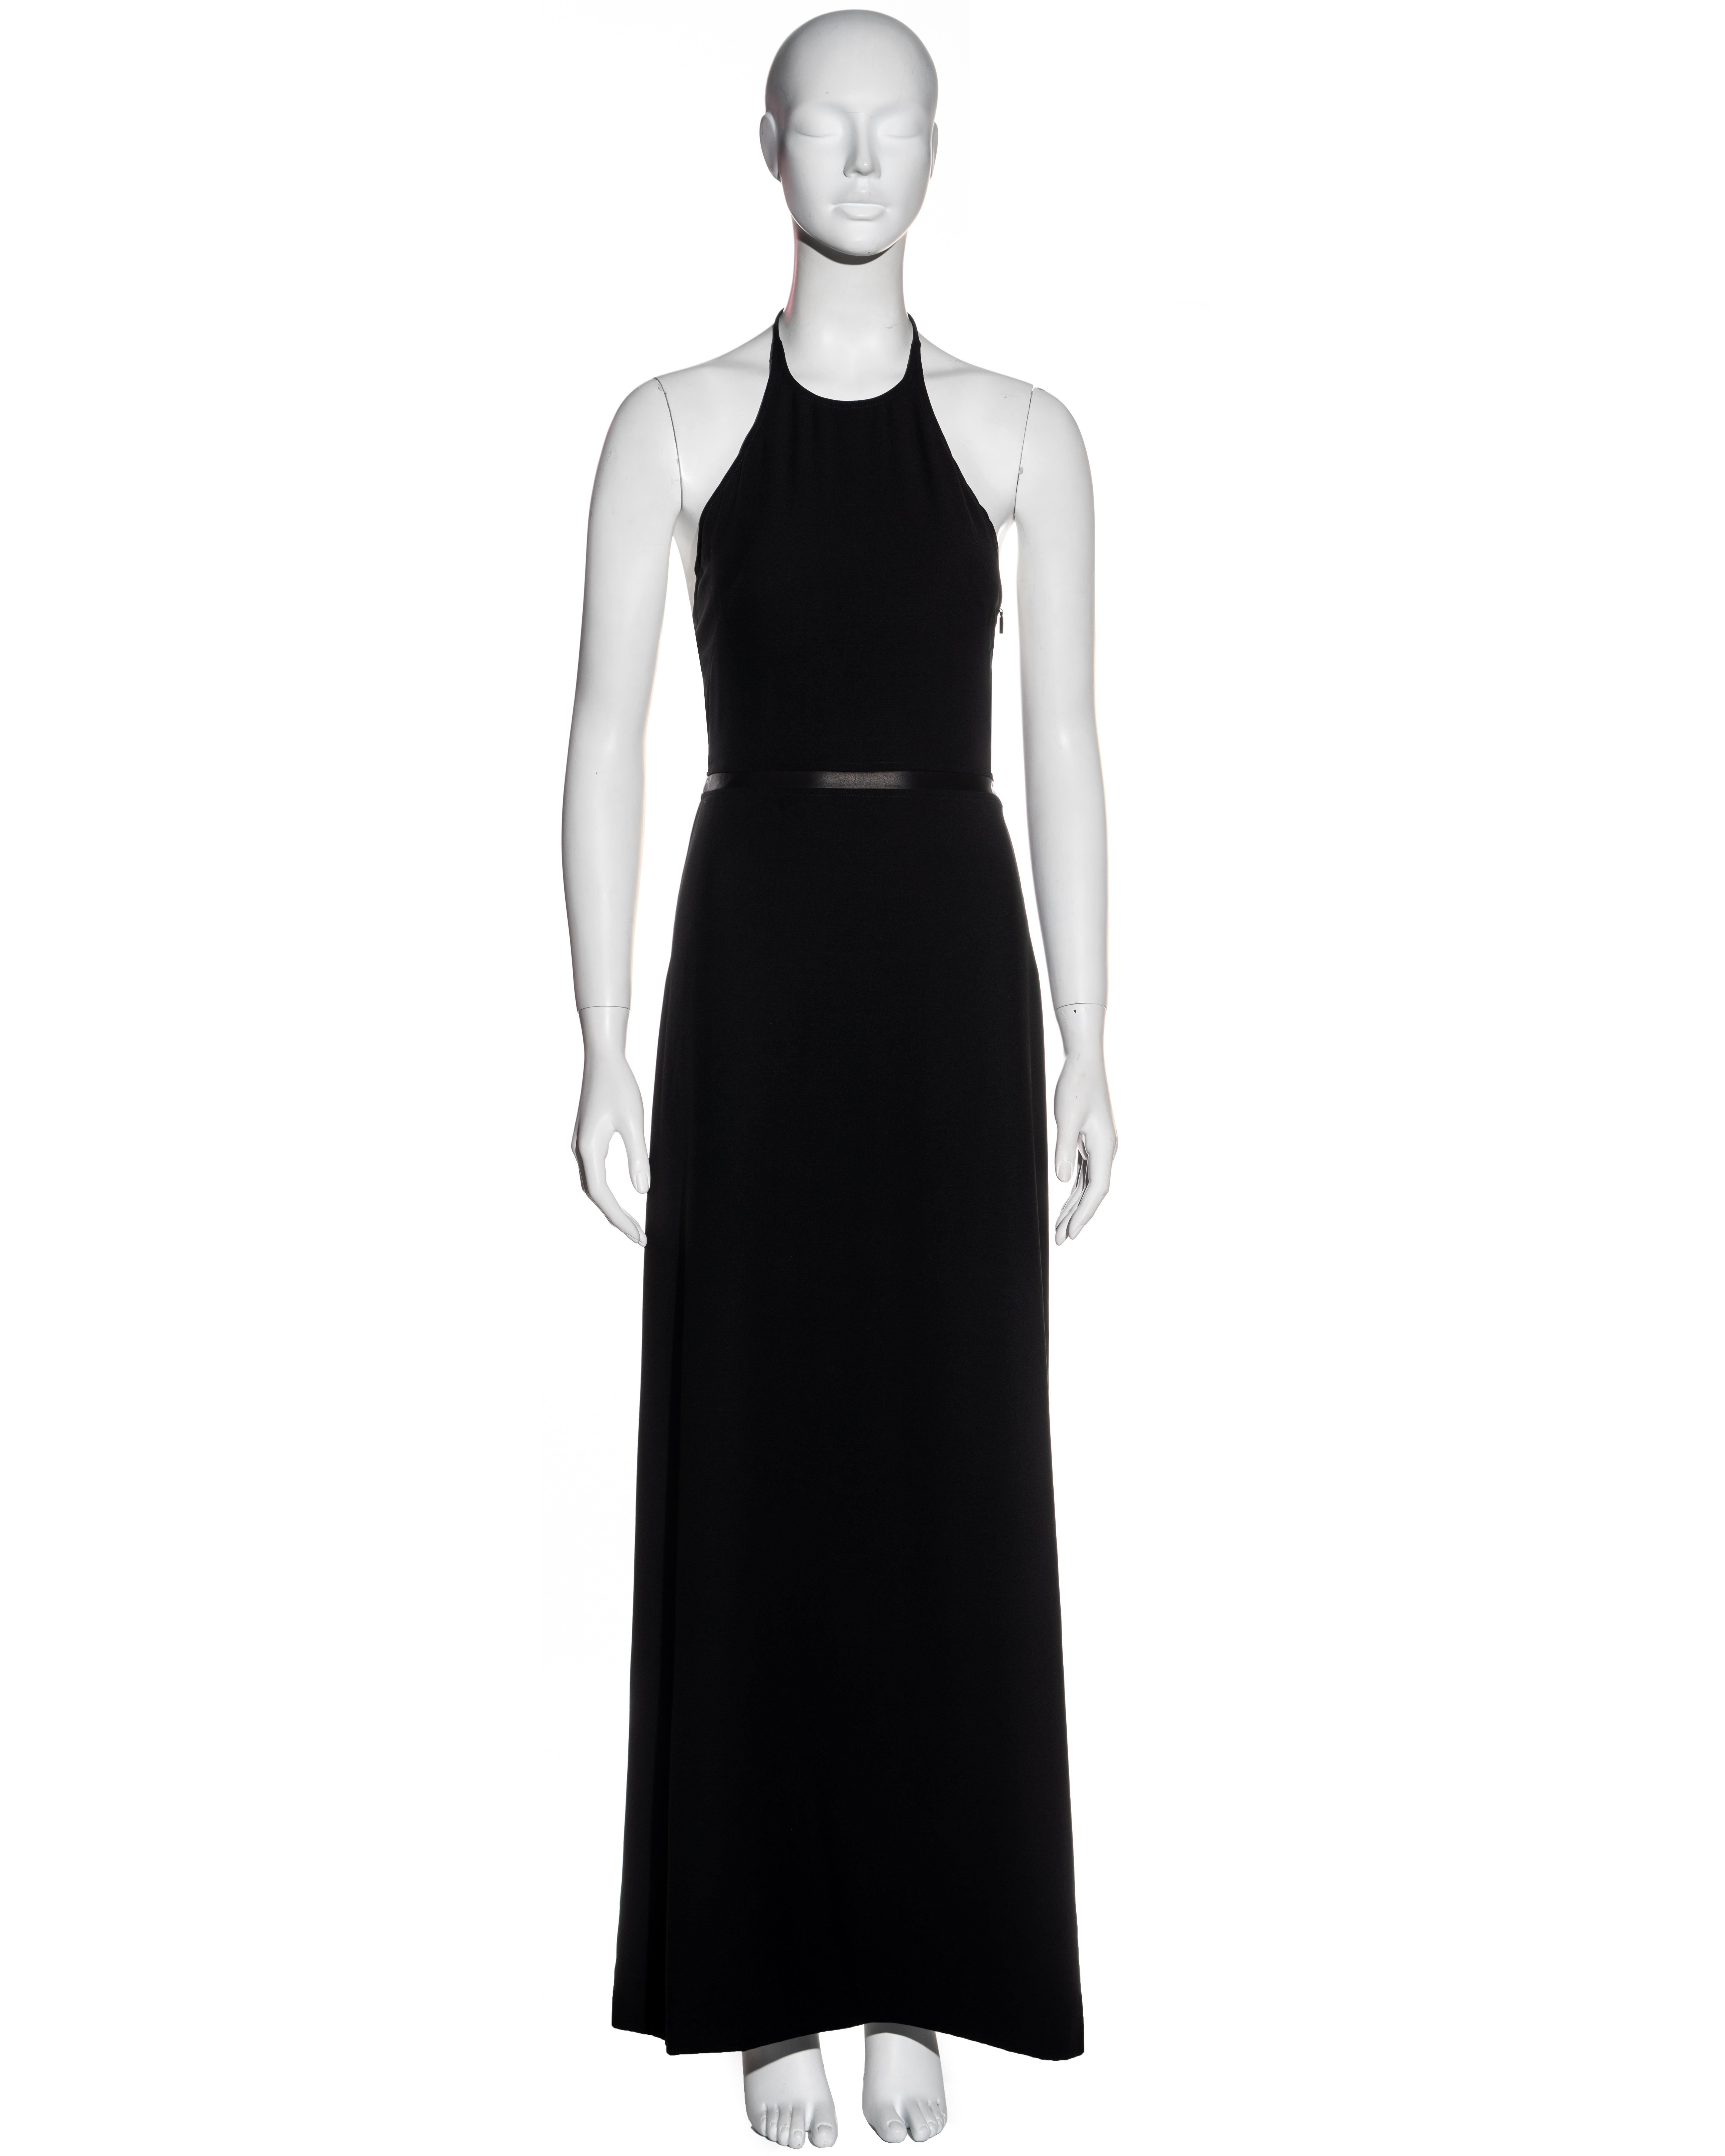 ▪ Gucci black wool halter neck maxi dress
▪ Designed by Tom Ford
▪ Black leather waistband 
▪ Fitted bodice
▪ A-line maxi skirt 
▪ Concealed zipper at side seam 
▪ Gold 'G' pendent detail
▪ New with tags
▪ IT 38 - FR 34 - UK 6 - US 2
▪ Fall-Winter